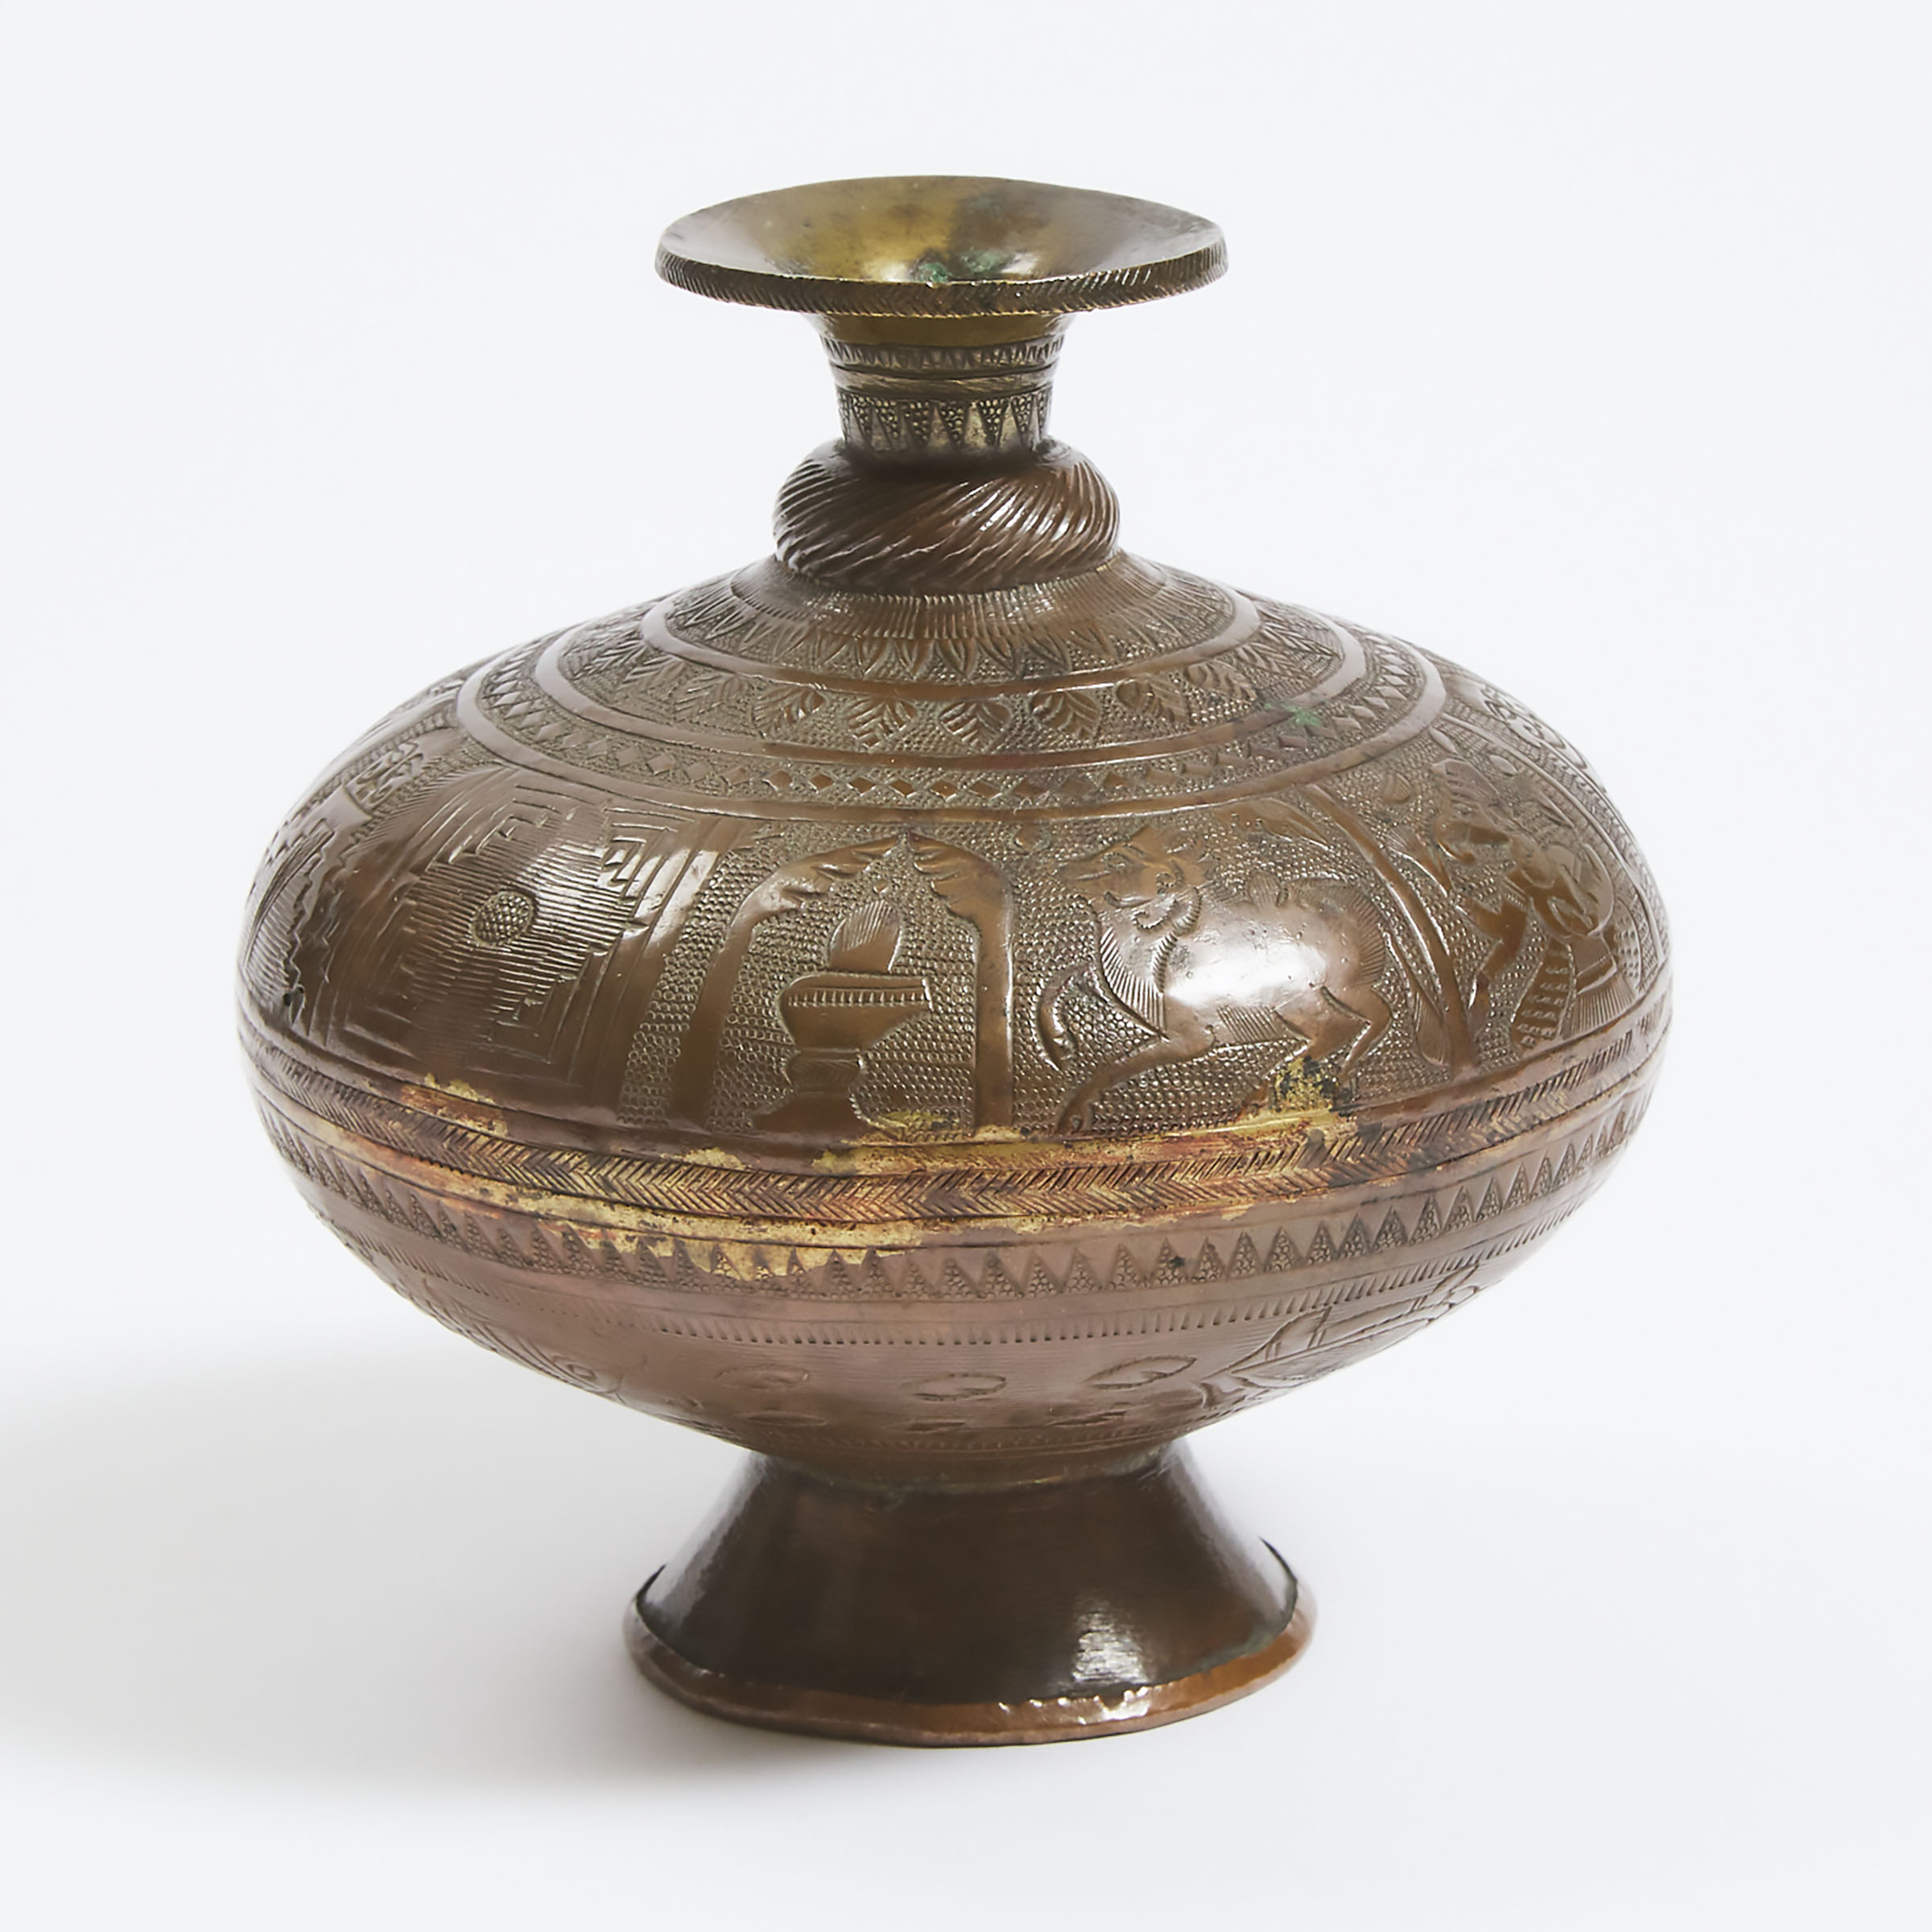 A Mughal Brass Vase Lota with 3ac292